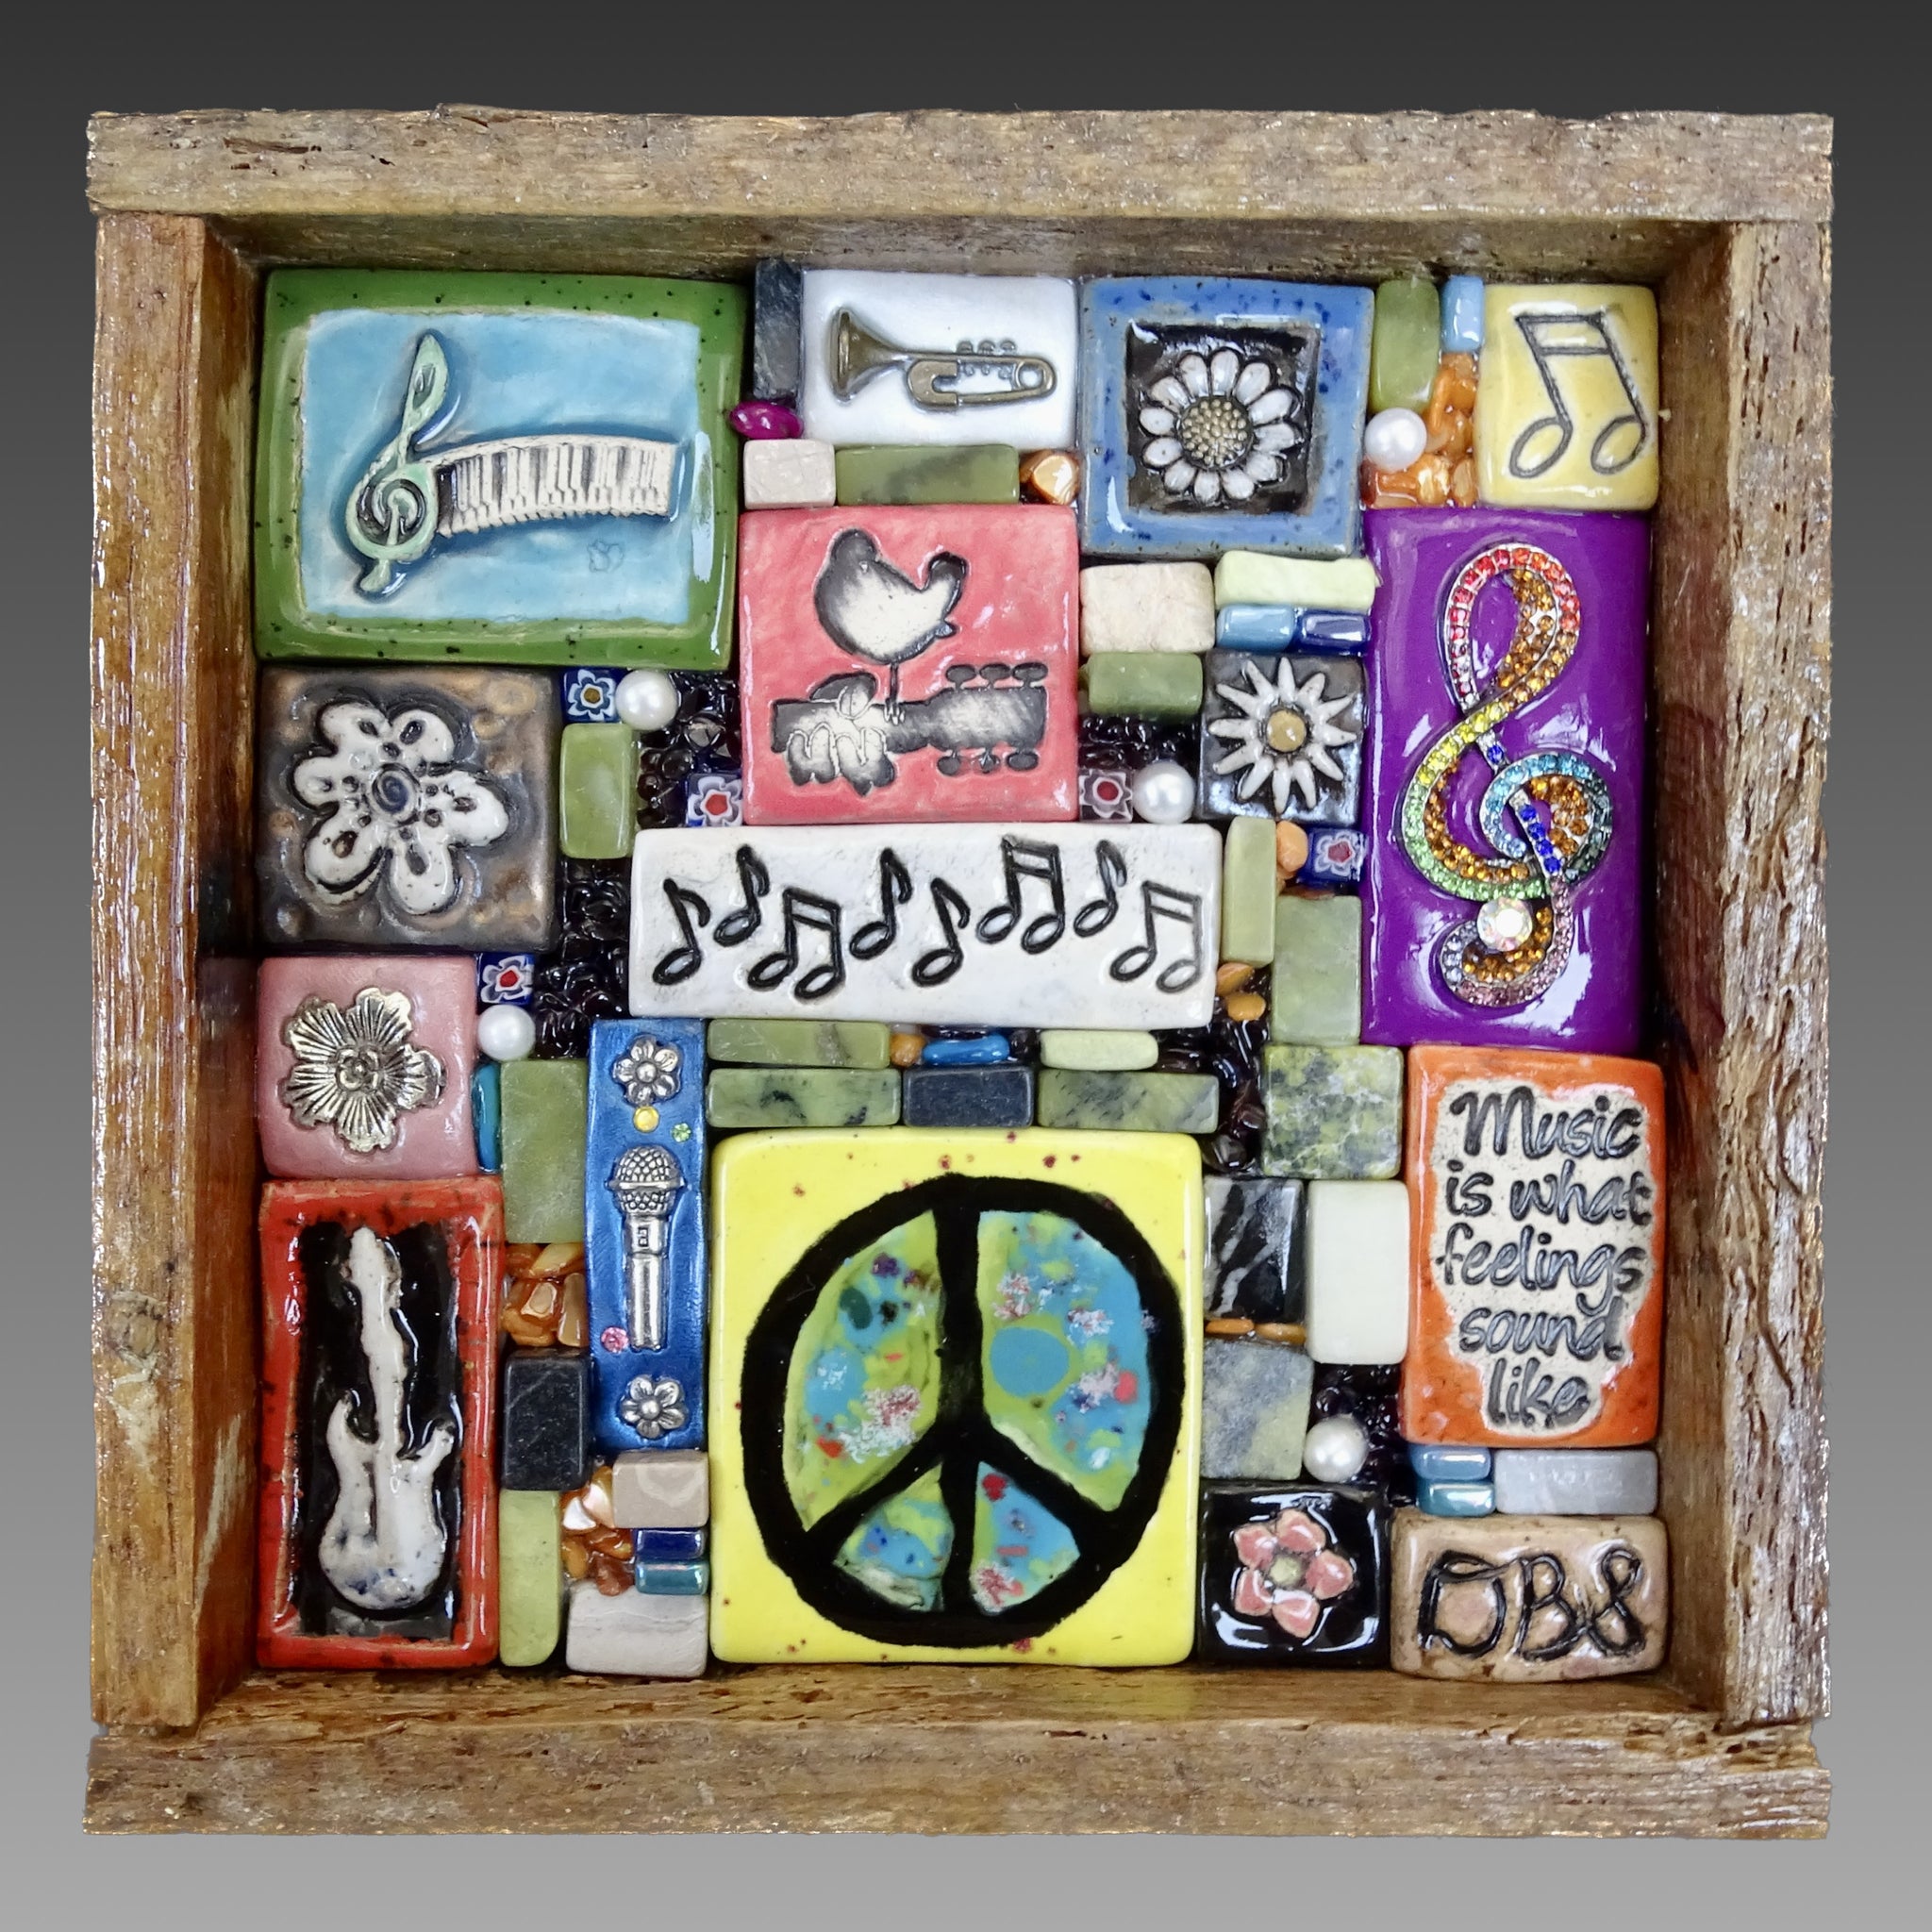 Clay mosaic artwork with music theme, colorful peace sign, flowers, woodstock, music notes, instruments, guitars, unique gift idea for musician or music lover